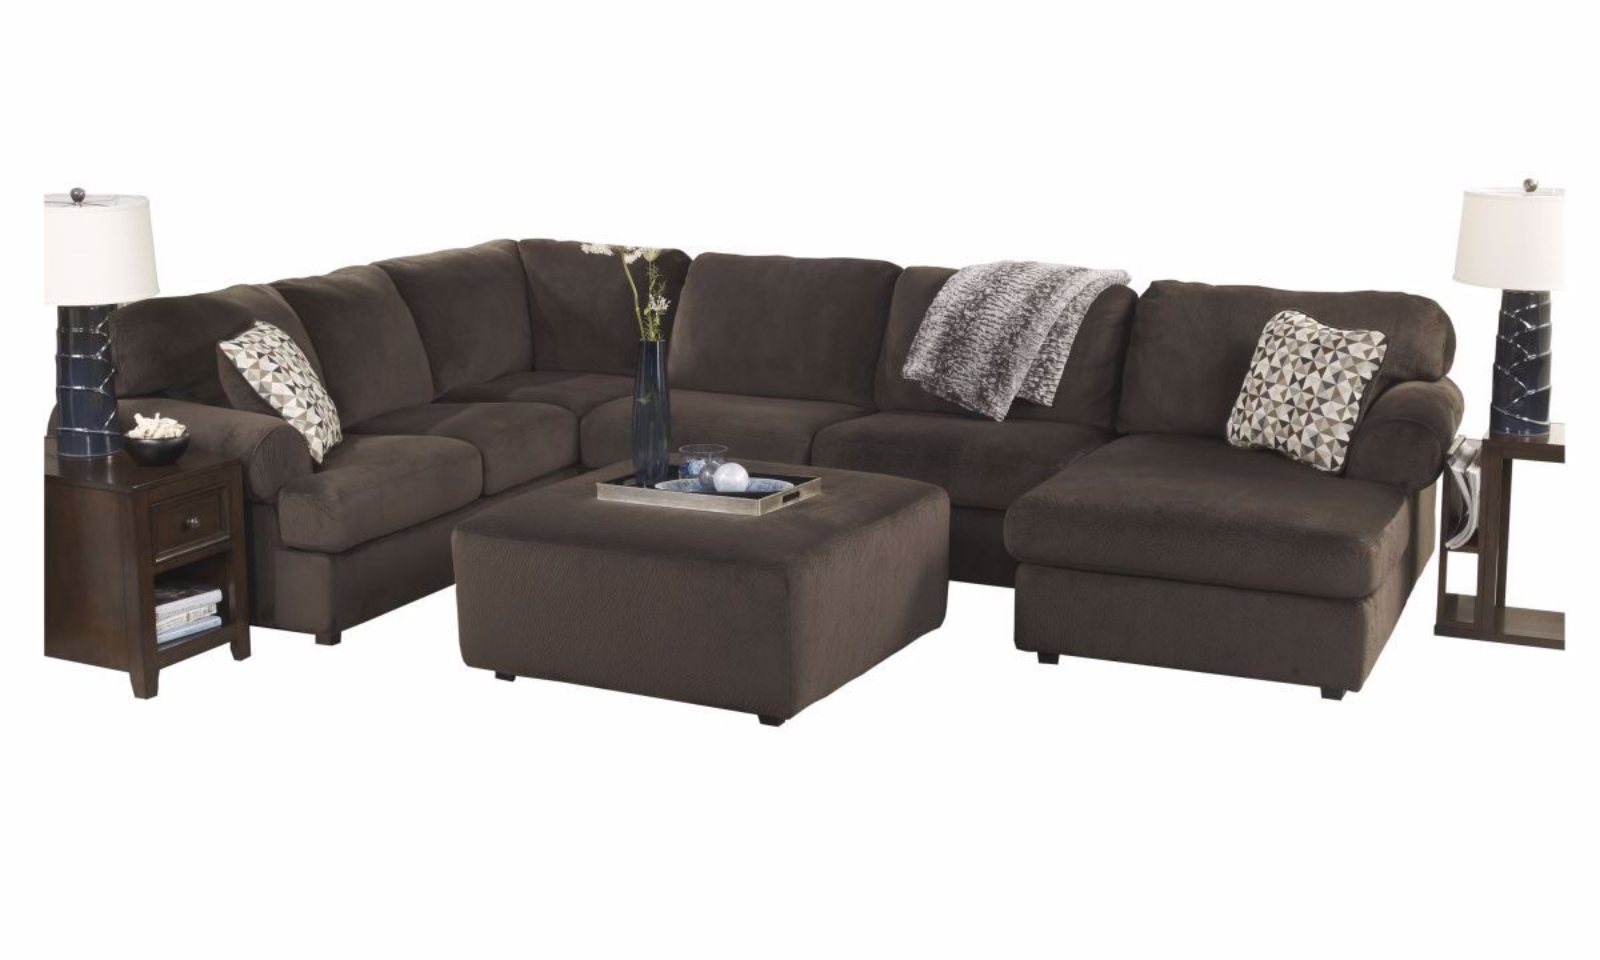 Picture of Jessa Place Sectional with Ottoman